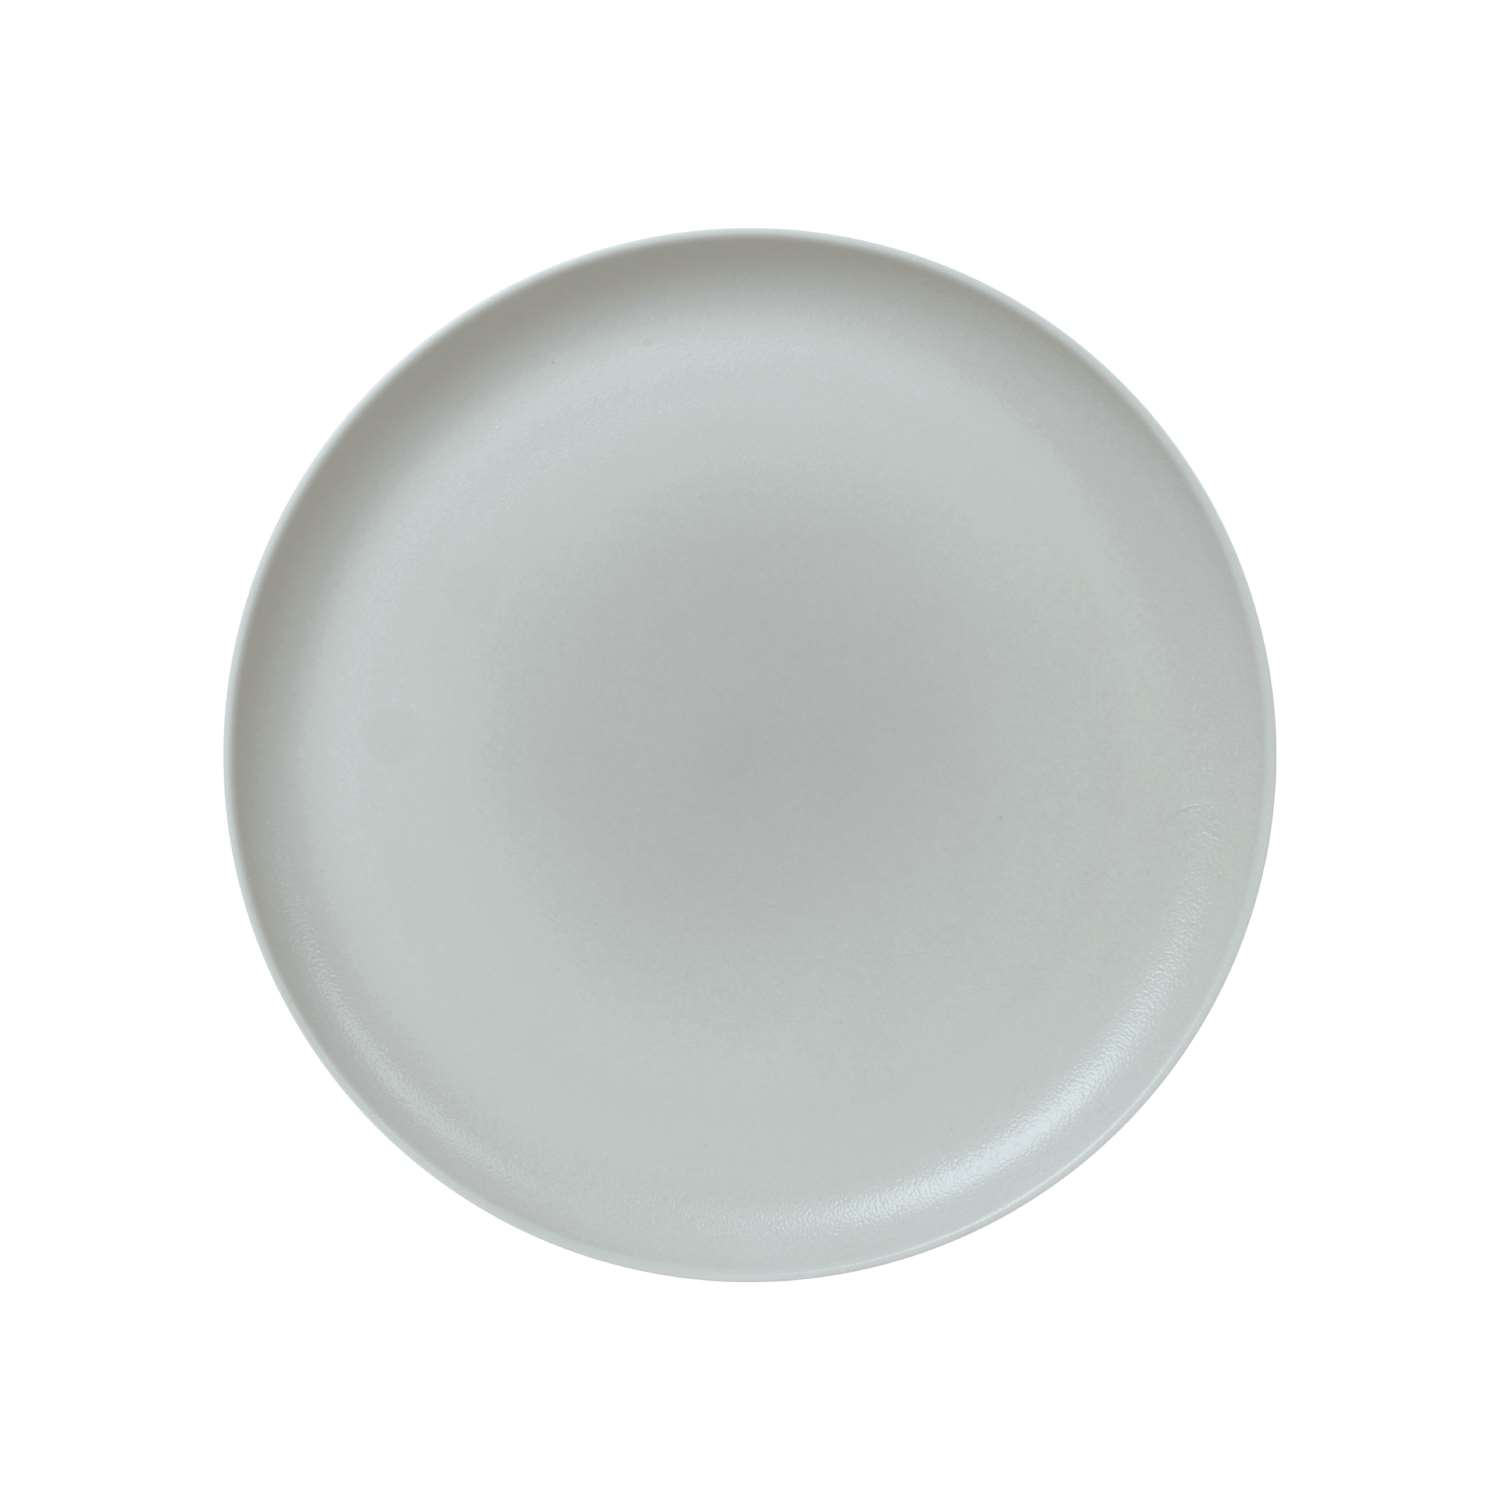 Baralee Light Grey Coupe Plate 16 Cm